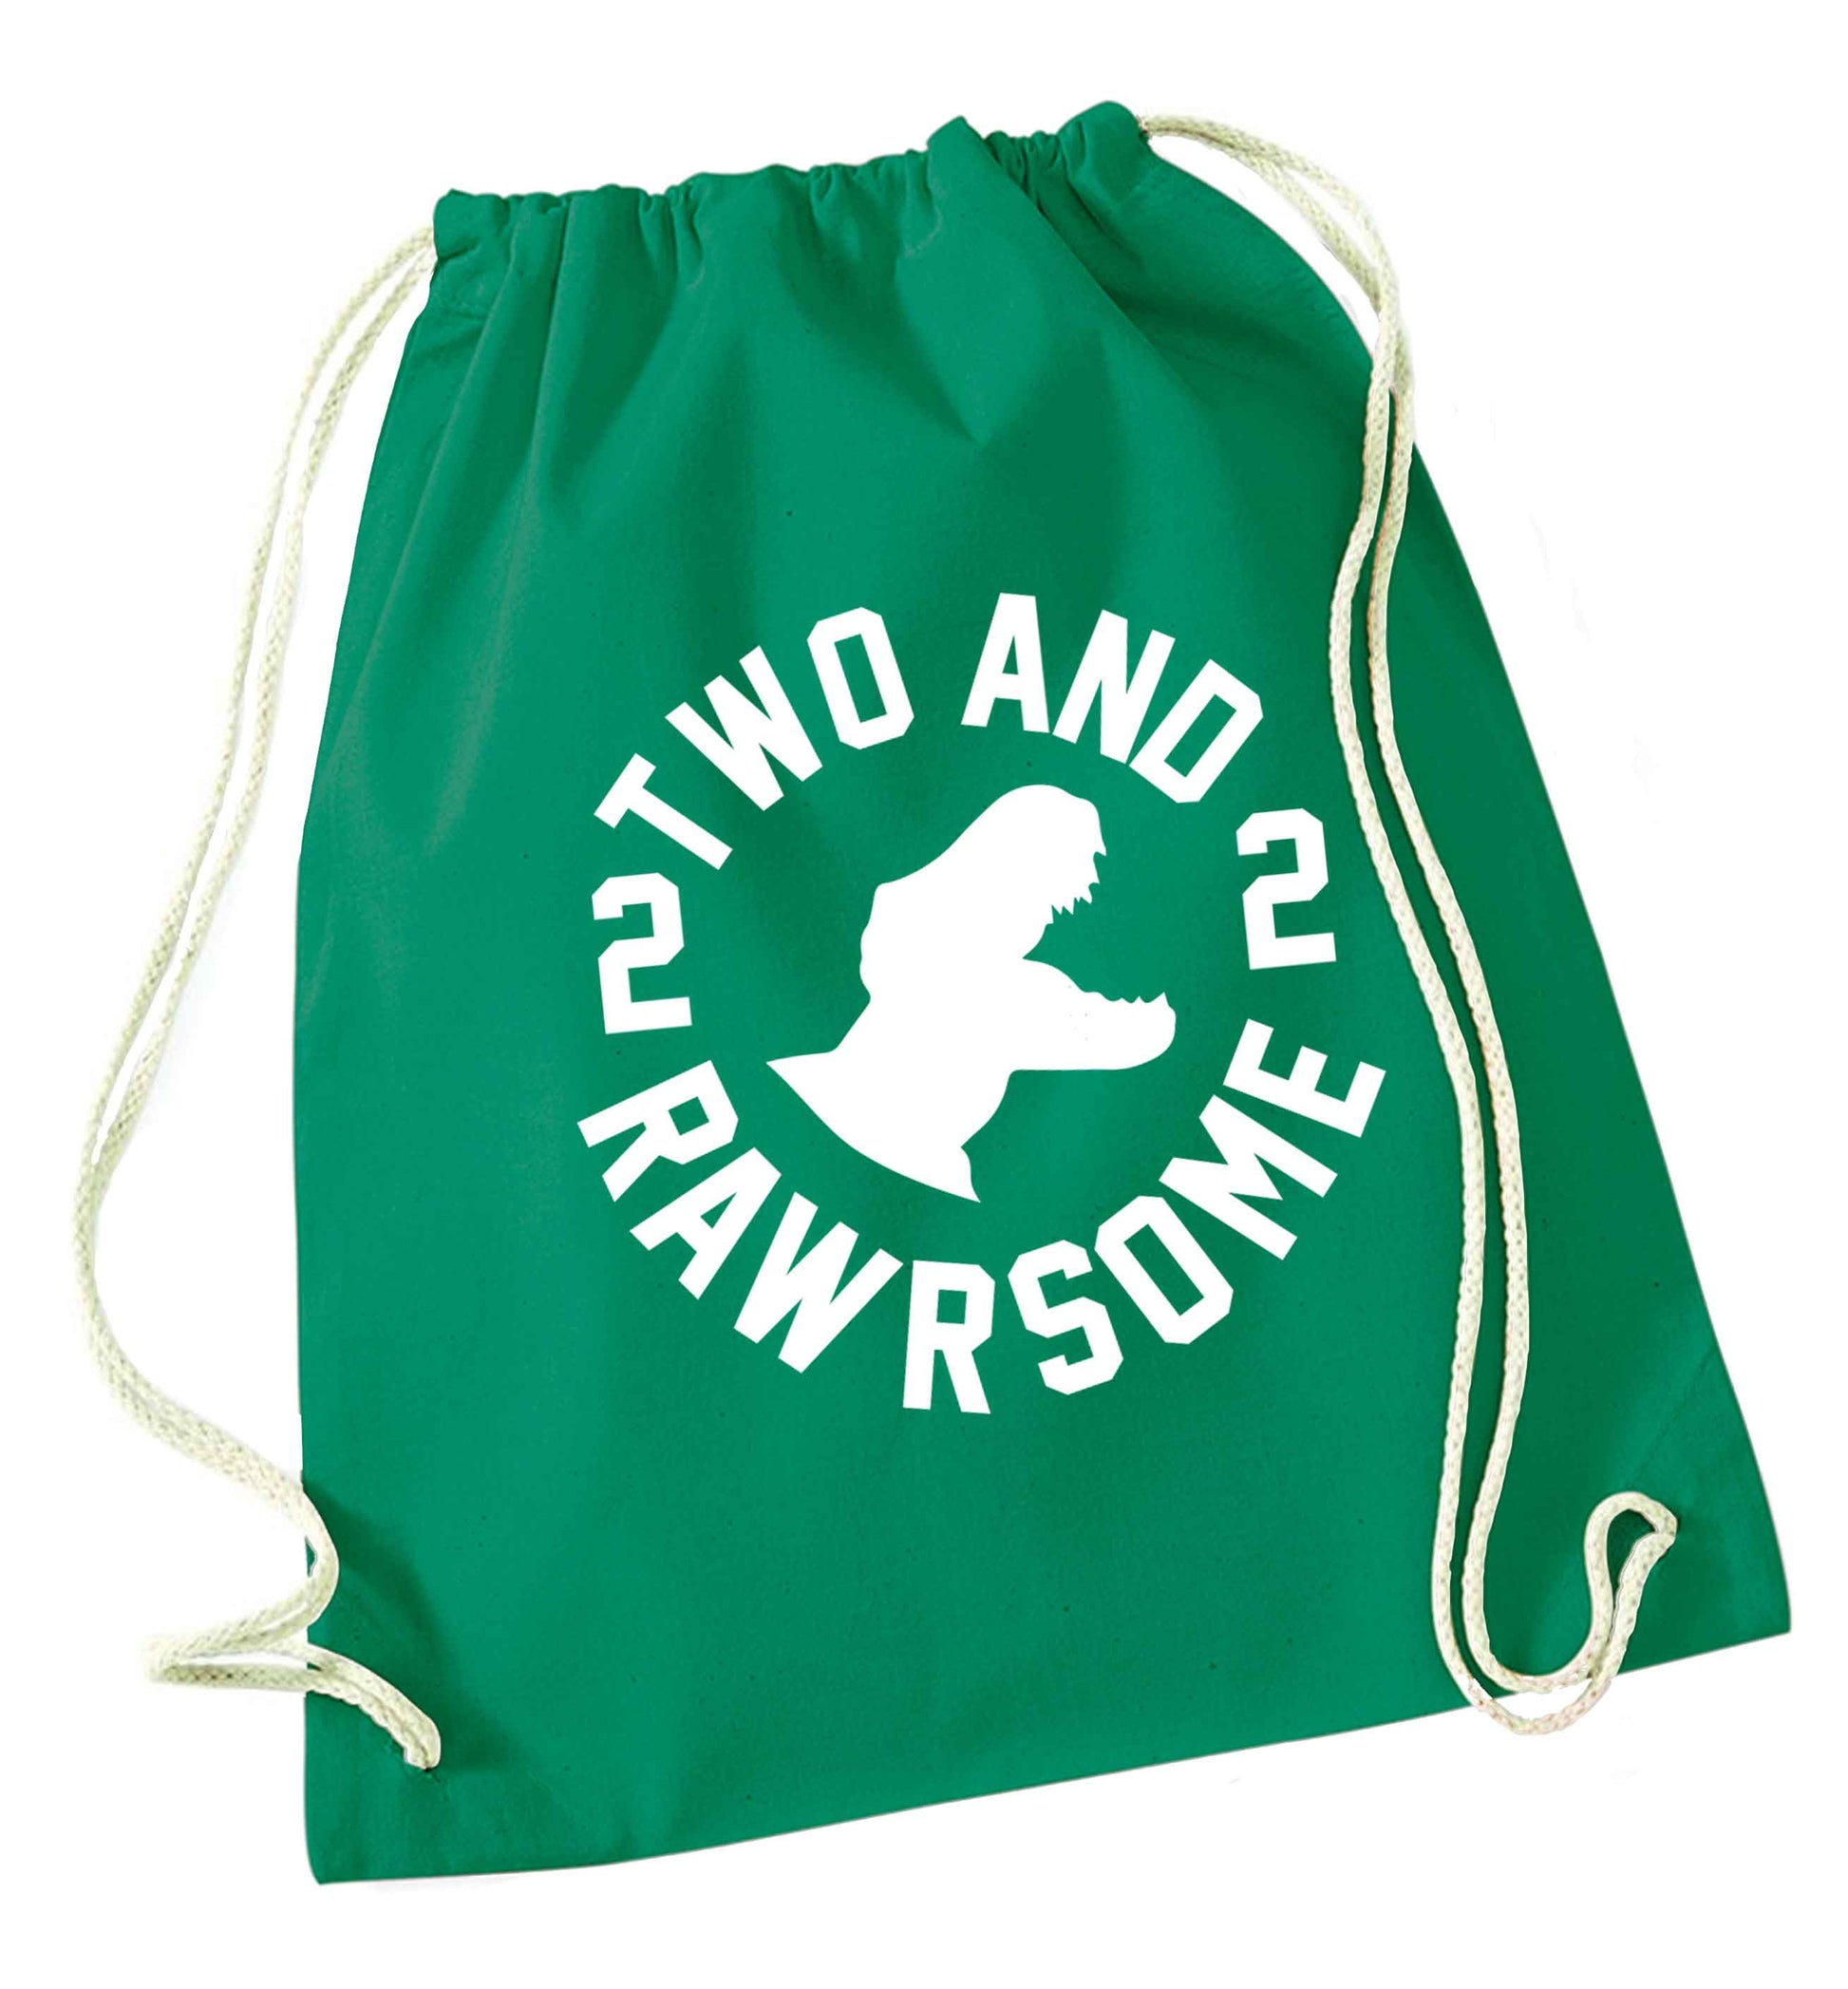 Two and rawrsome green drawstring bag